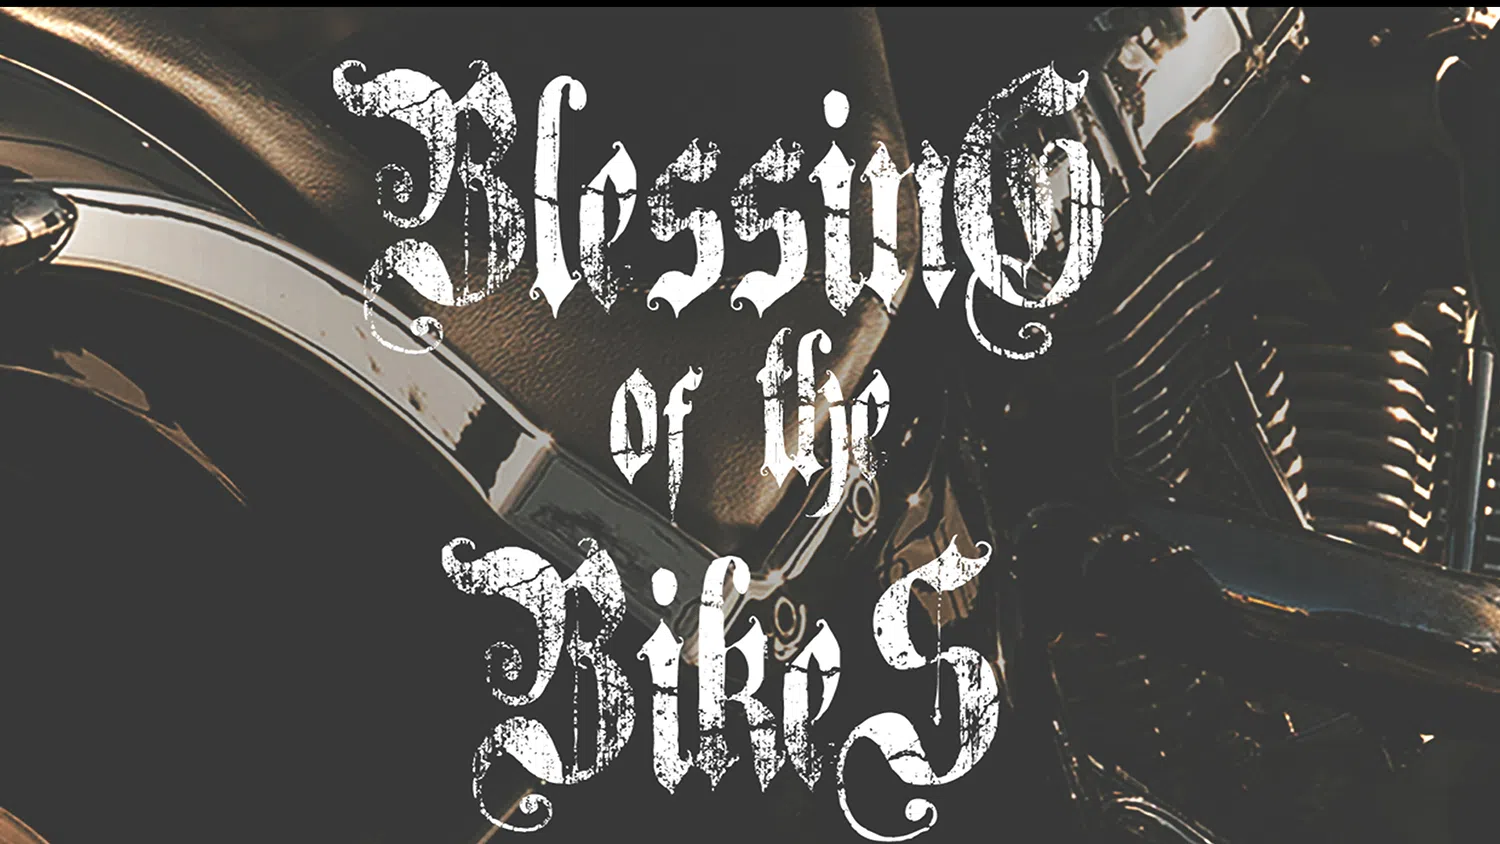 Pastor Bill Campbell: Blessing of the Bikes